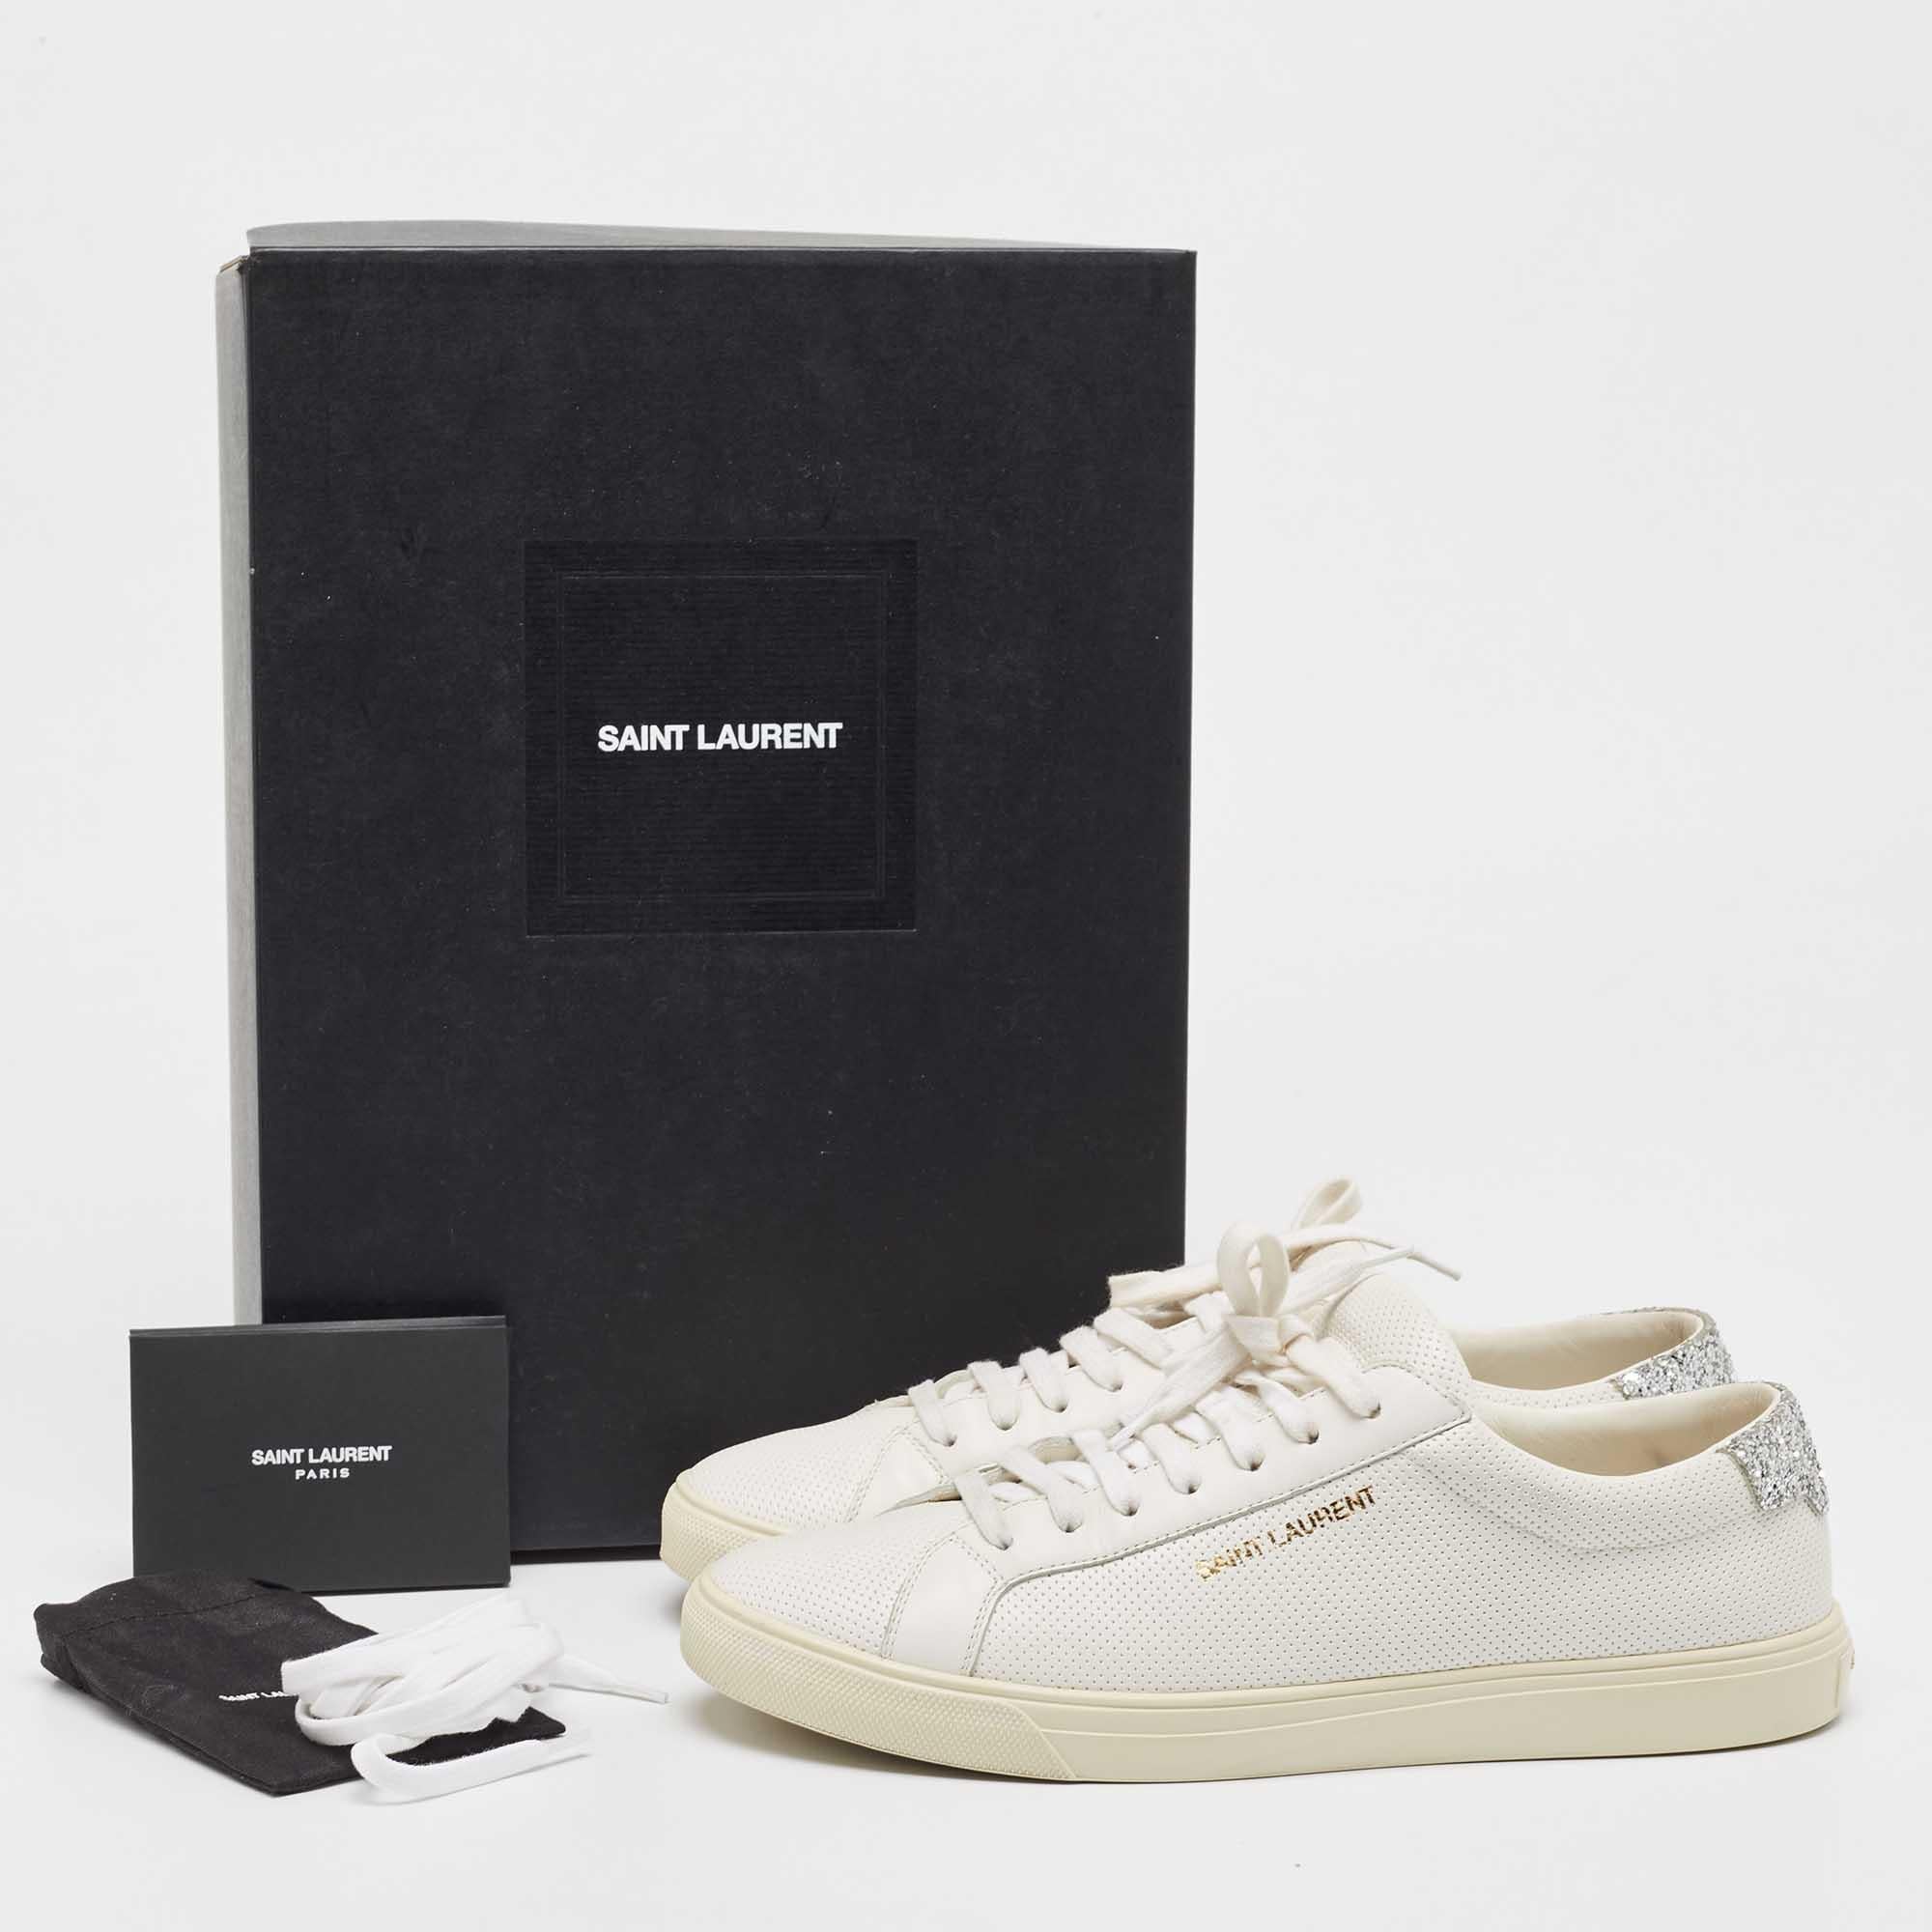 Saint Laurent Silver/White Leather and Glitter Andy Sneakers Size 40 4